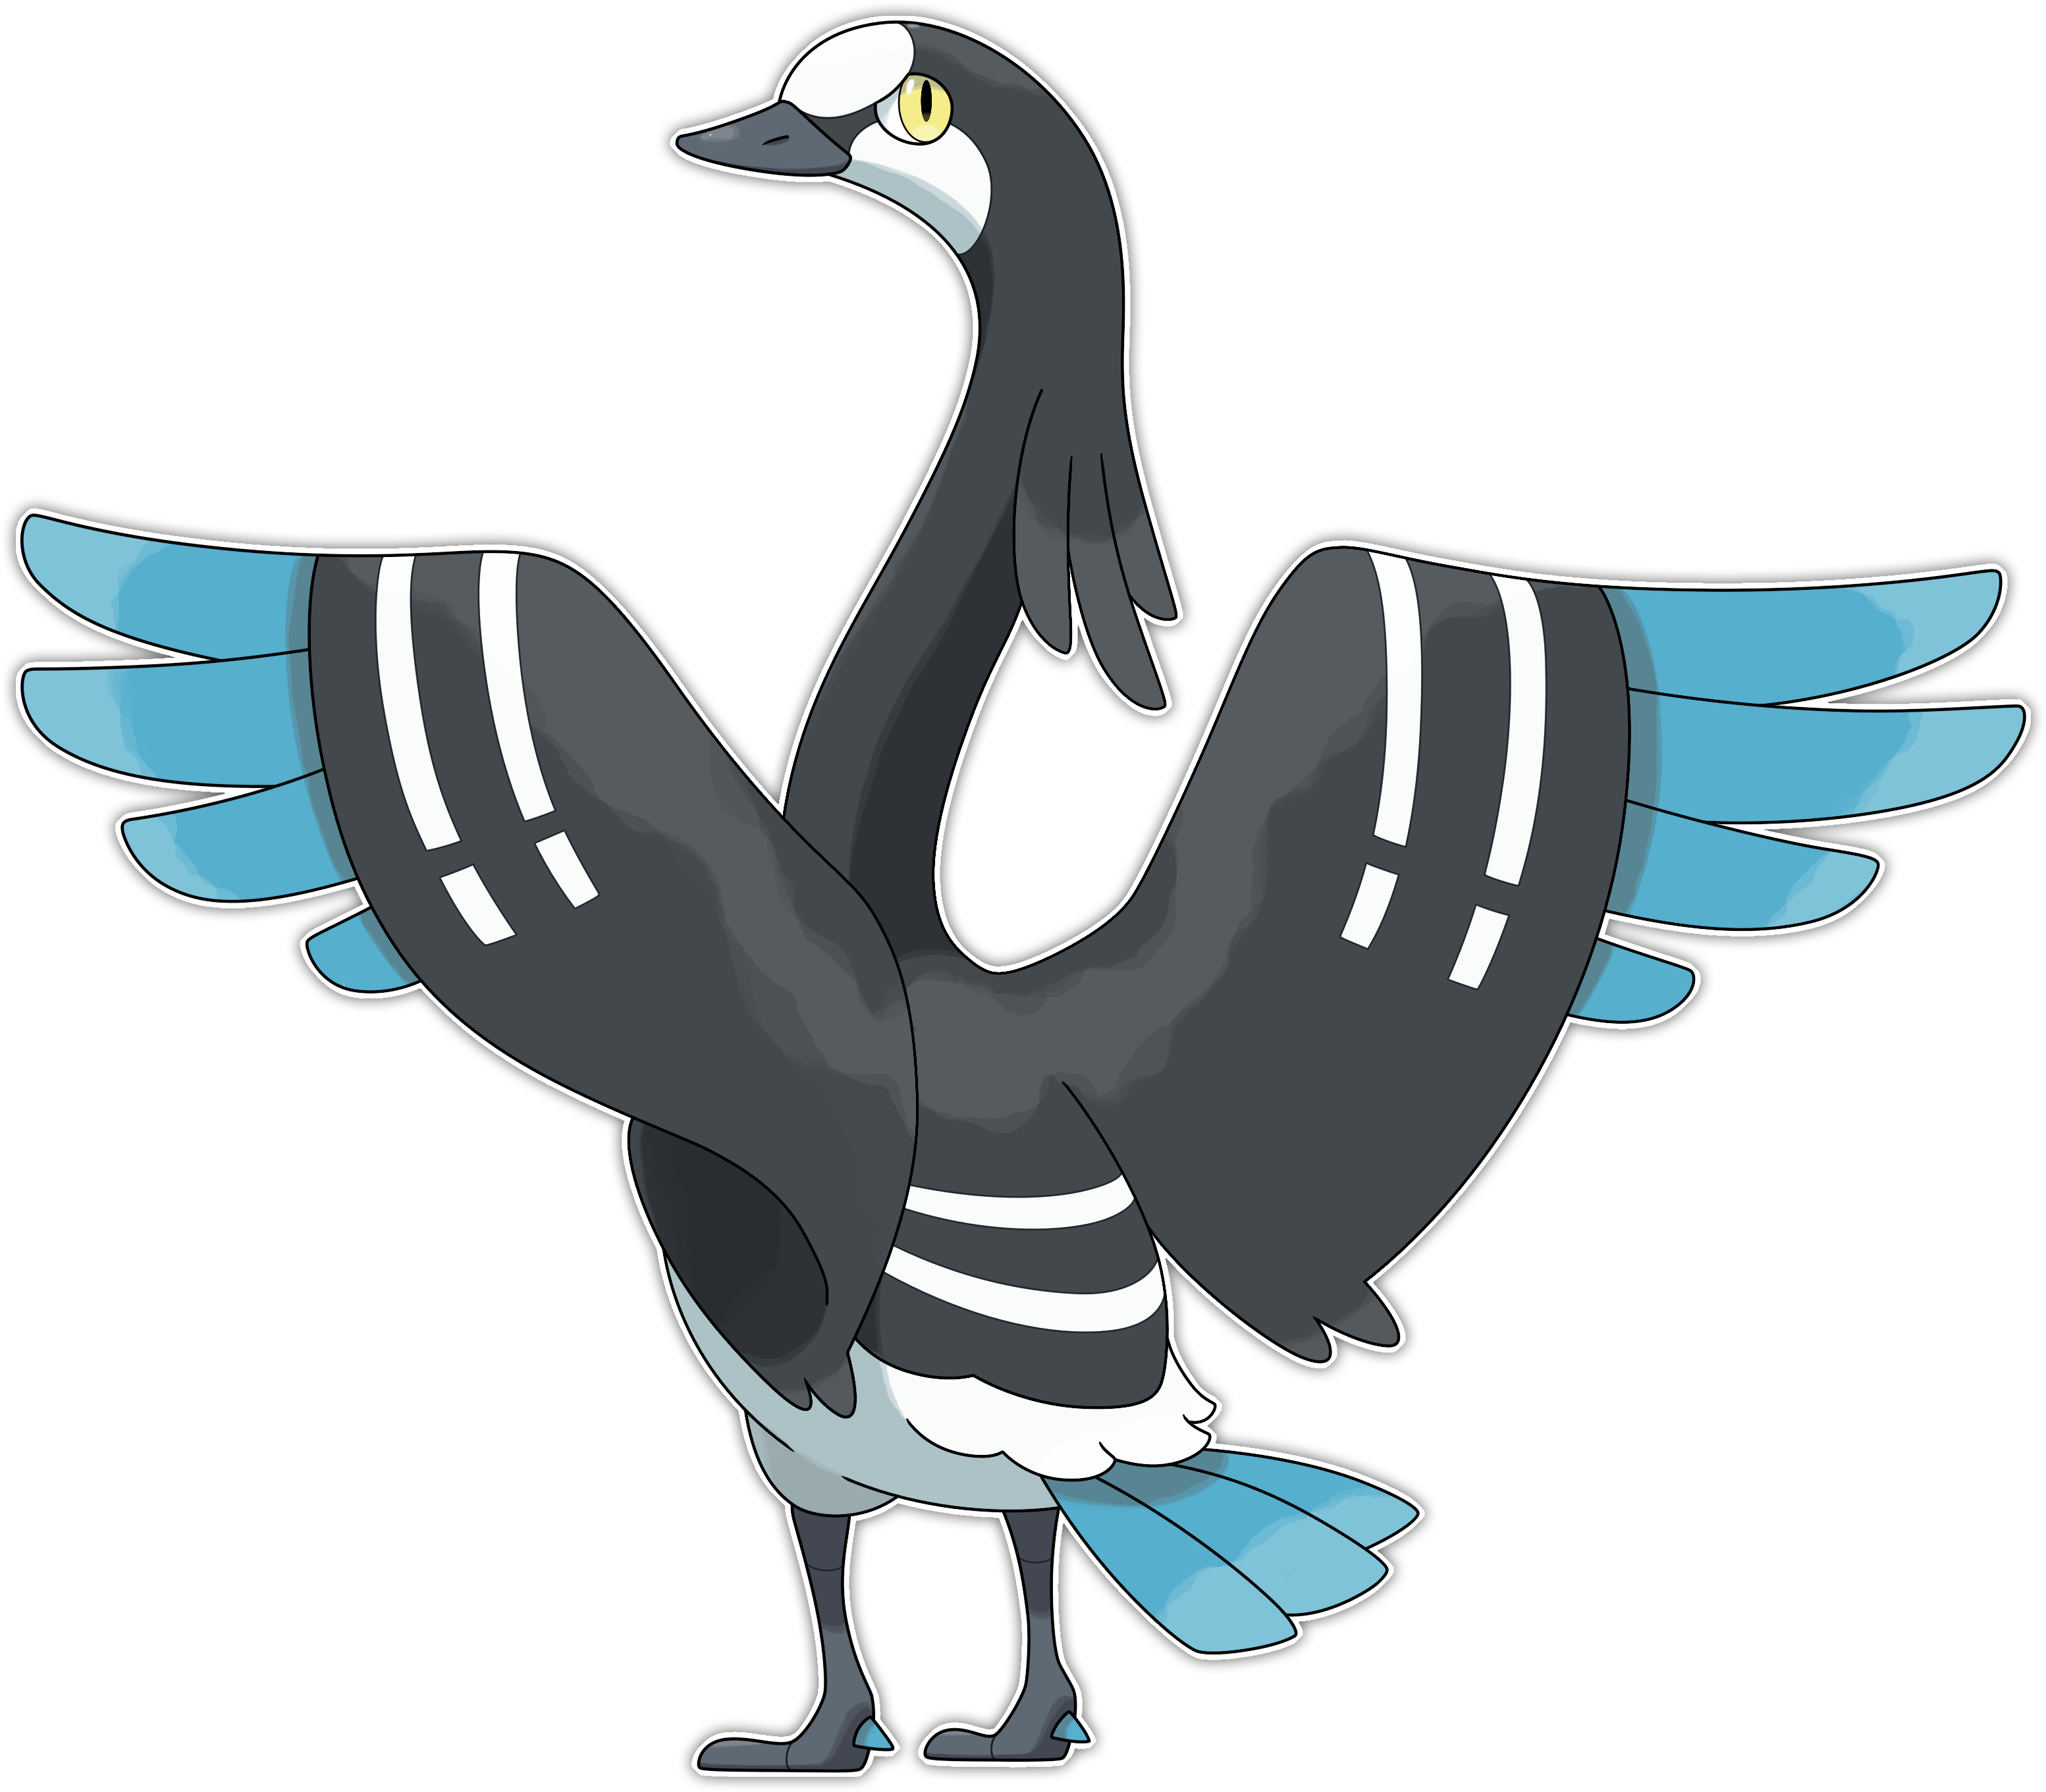 Migrating Fakemon By Smiley-fakemon - Canada Goose (3200x3200)